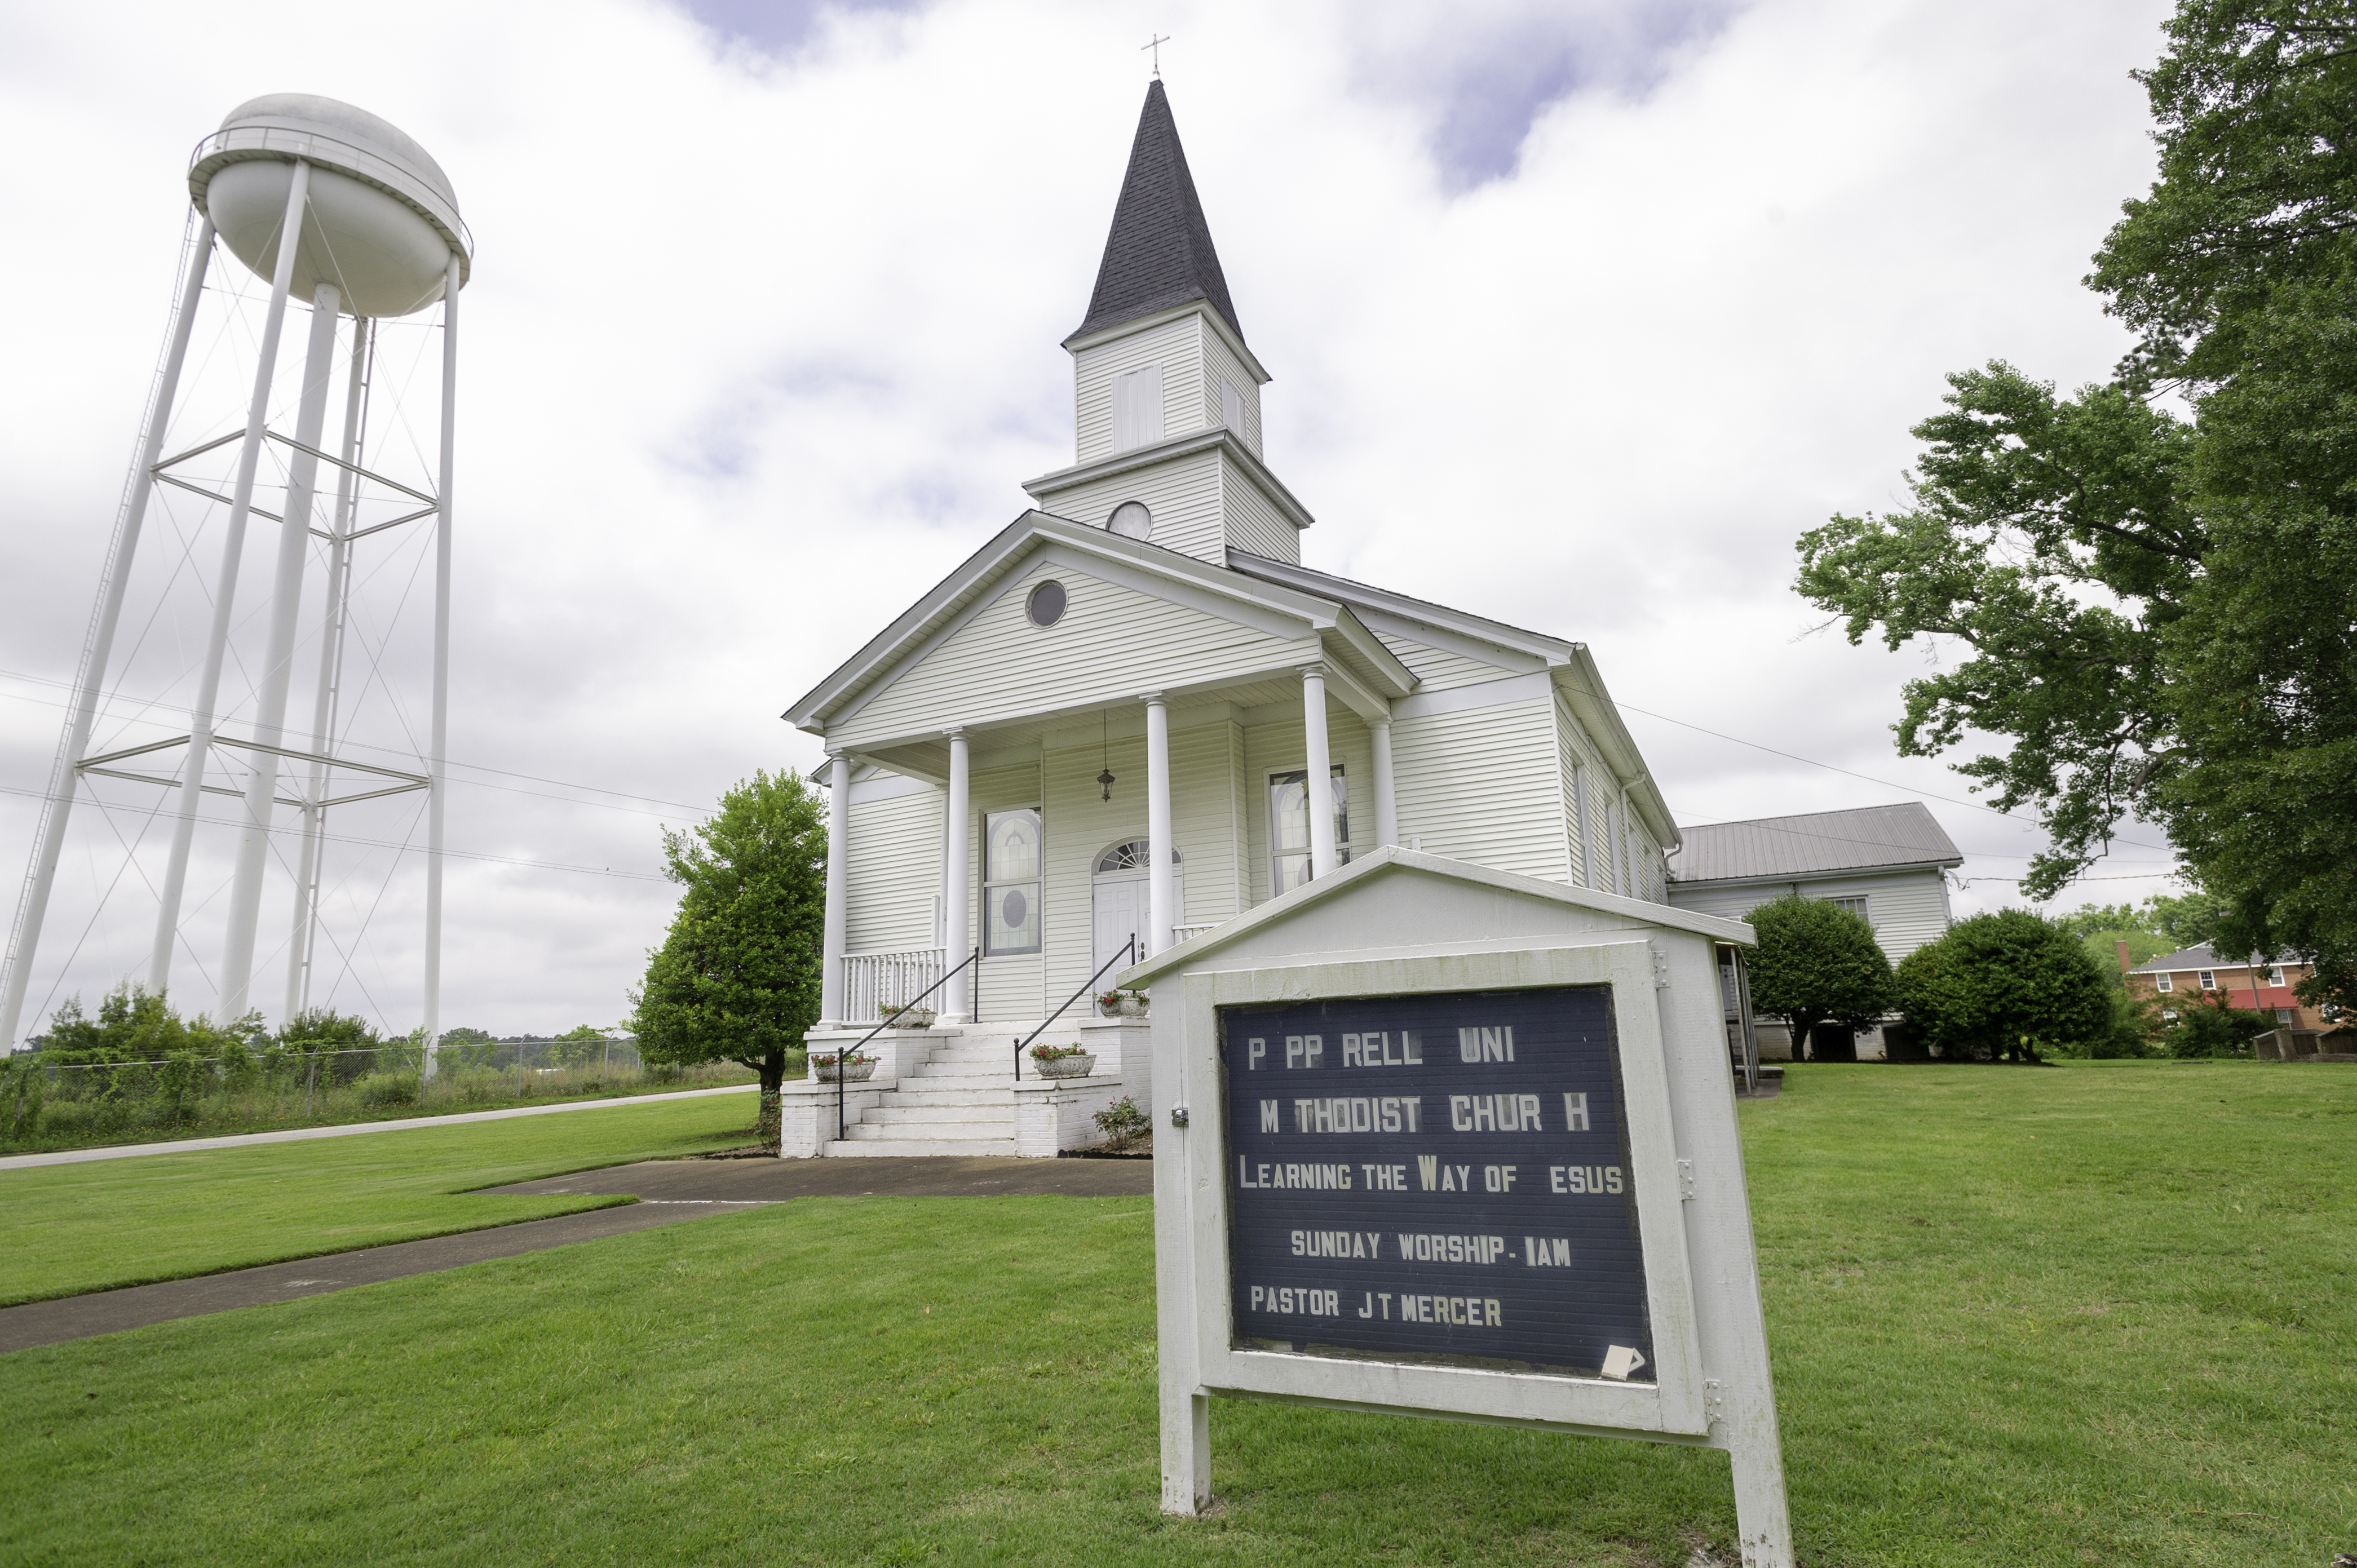 Alabama Rural Ministries to continue legacy of Pepperrell United Methodist